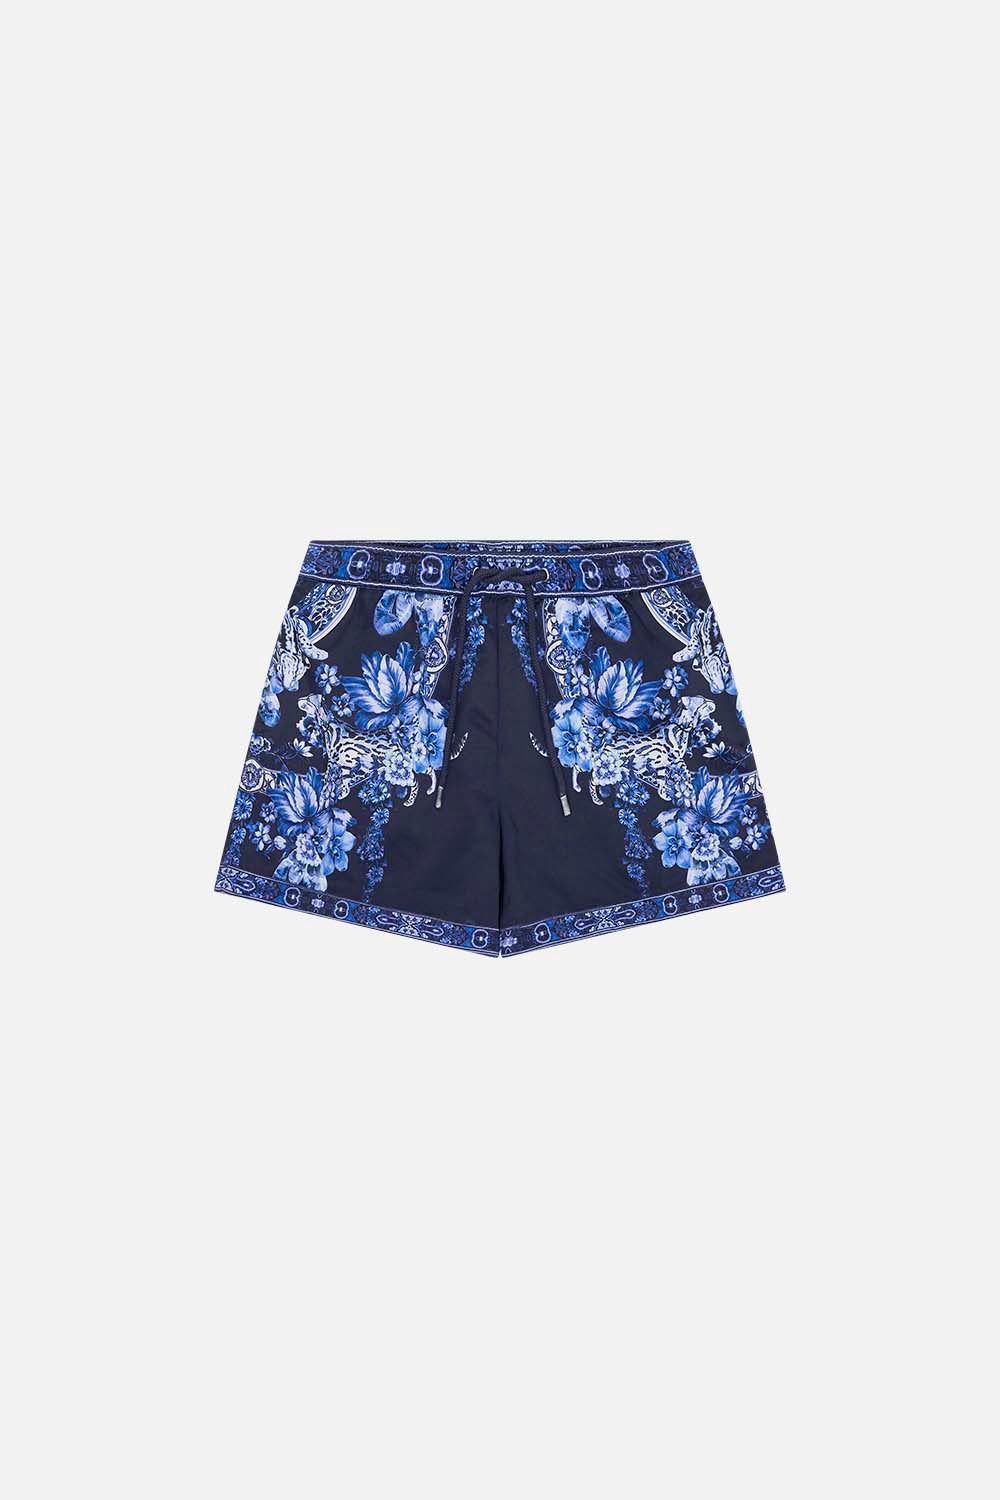 Front product view of Milla By CAMILLA boys boardshort in Delft Dynasty print